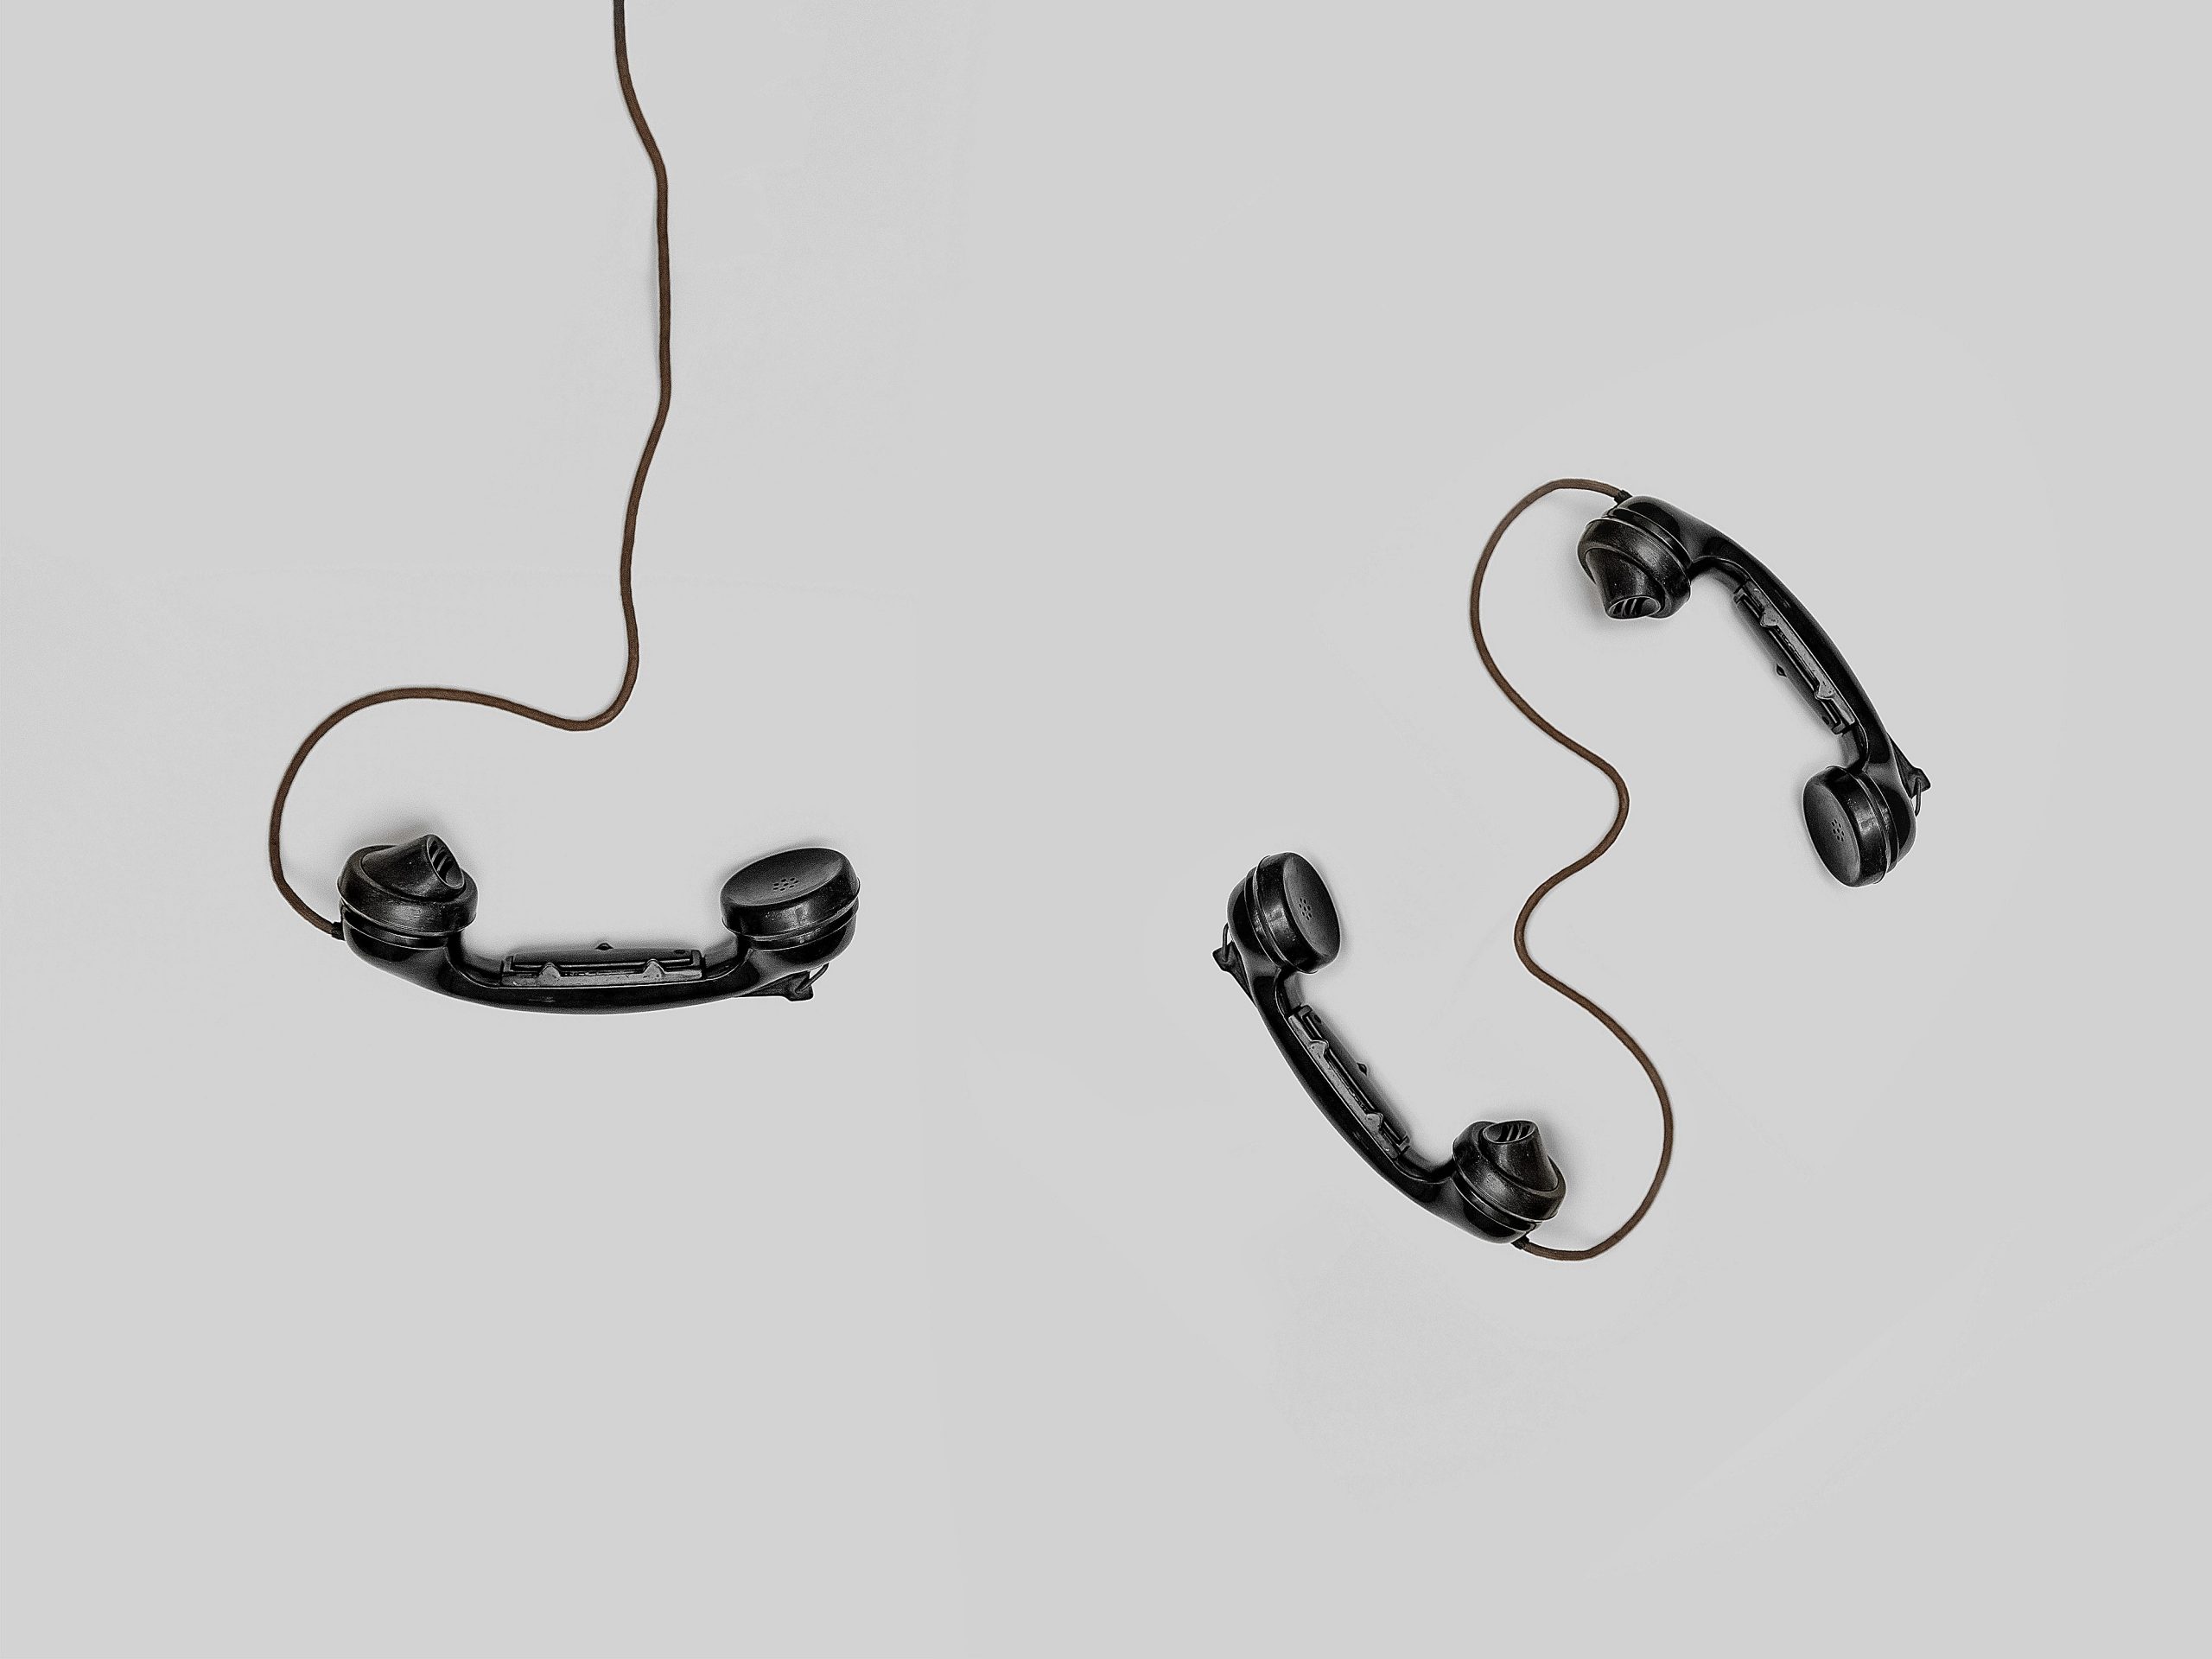 The background is white. Three phones lie haphazardly on the white background, with cords trailing out of the picture. 